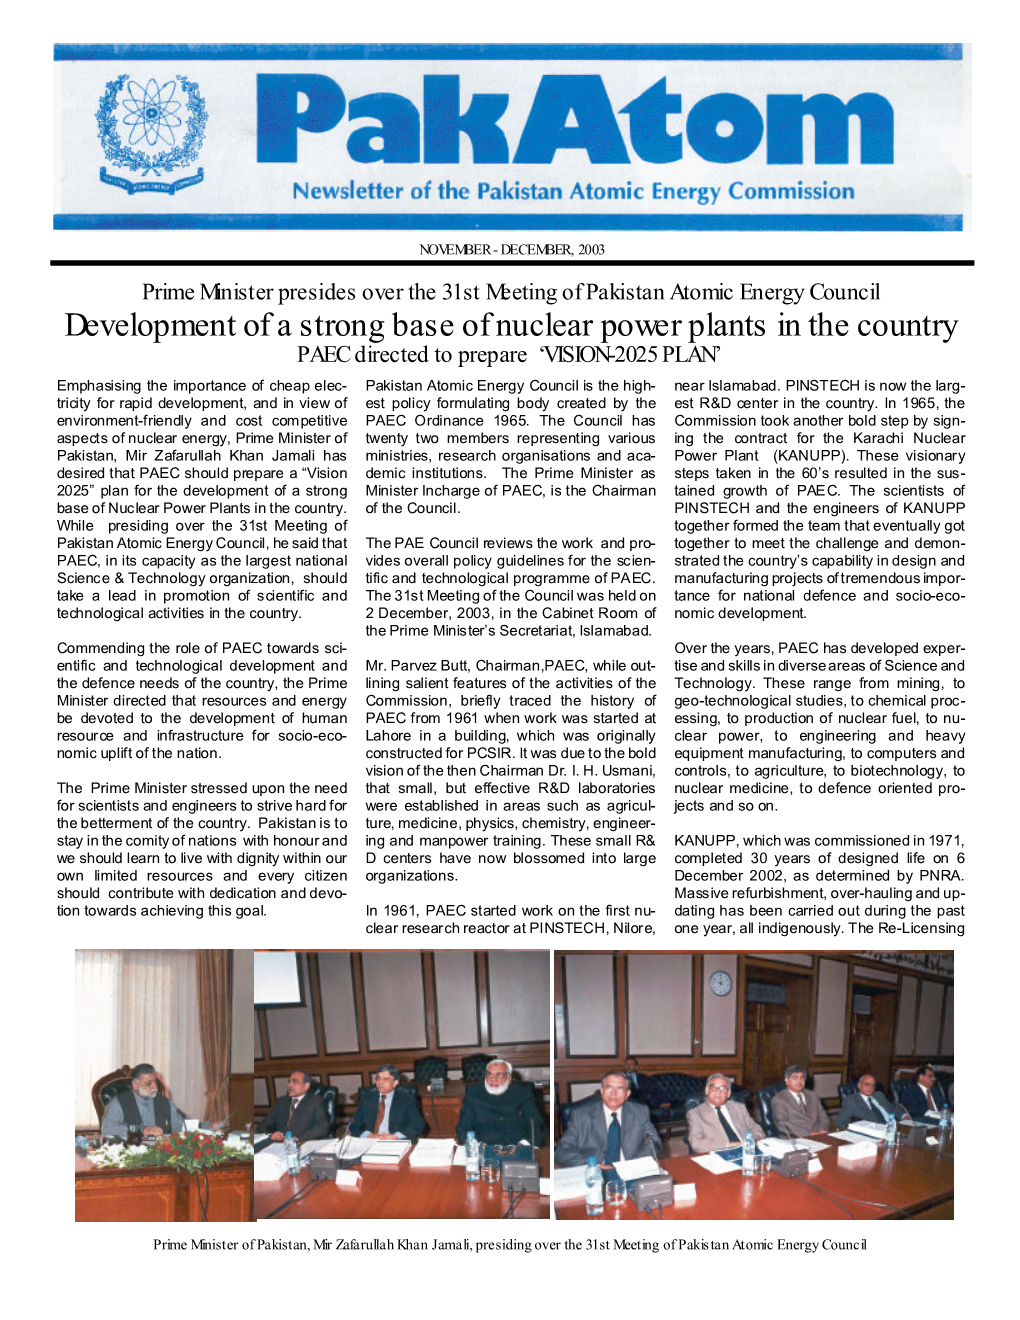 Development of a Strong Base of Nuclear Power Plants in the Country